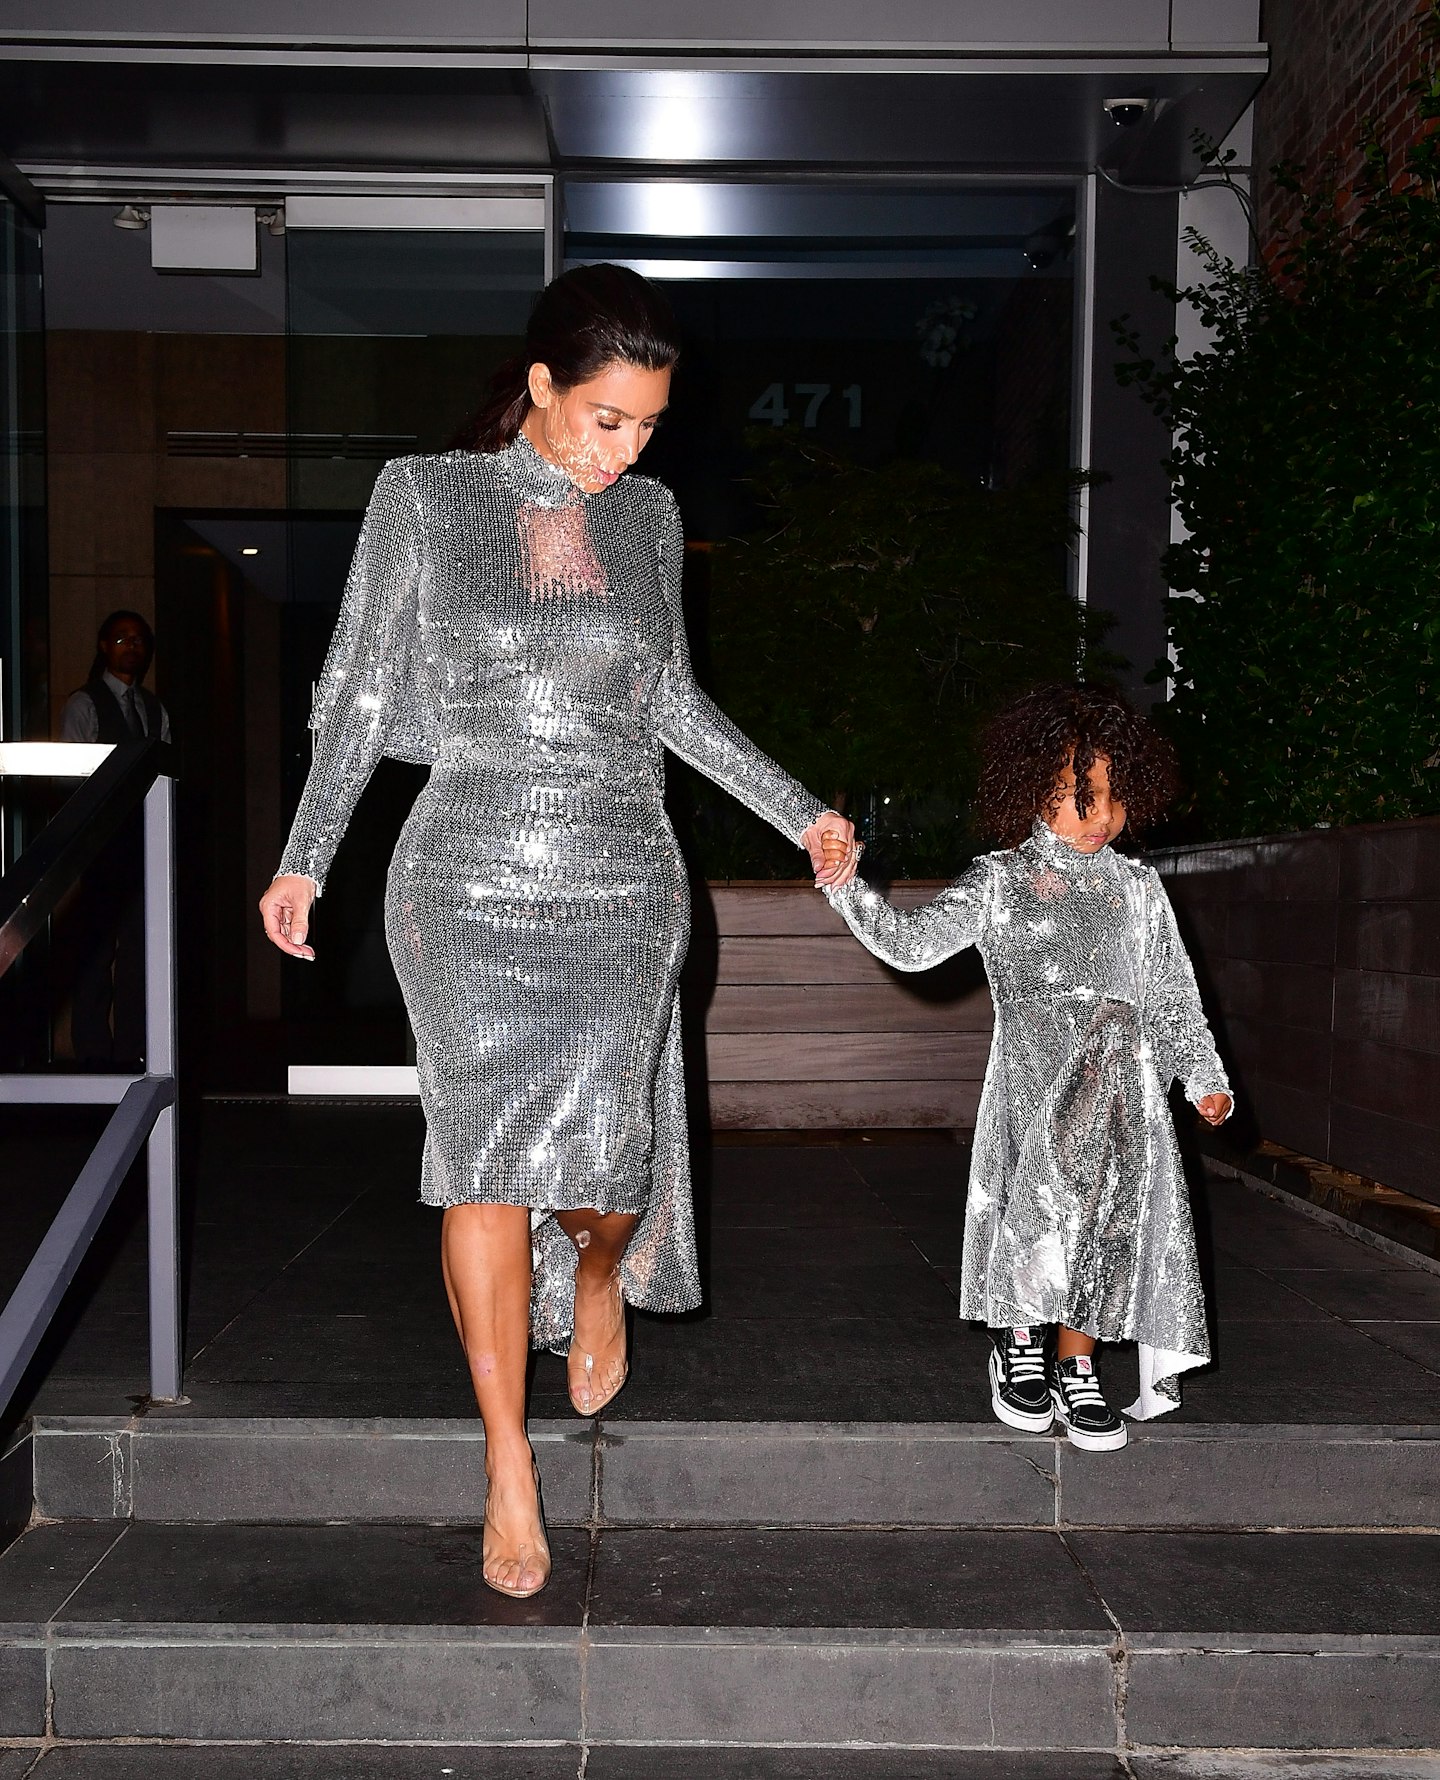 north west designs own clothes